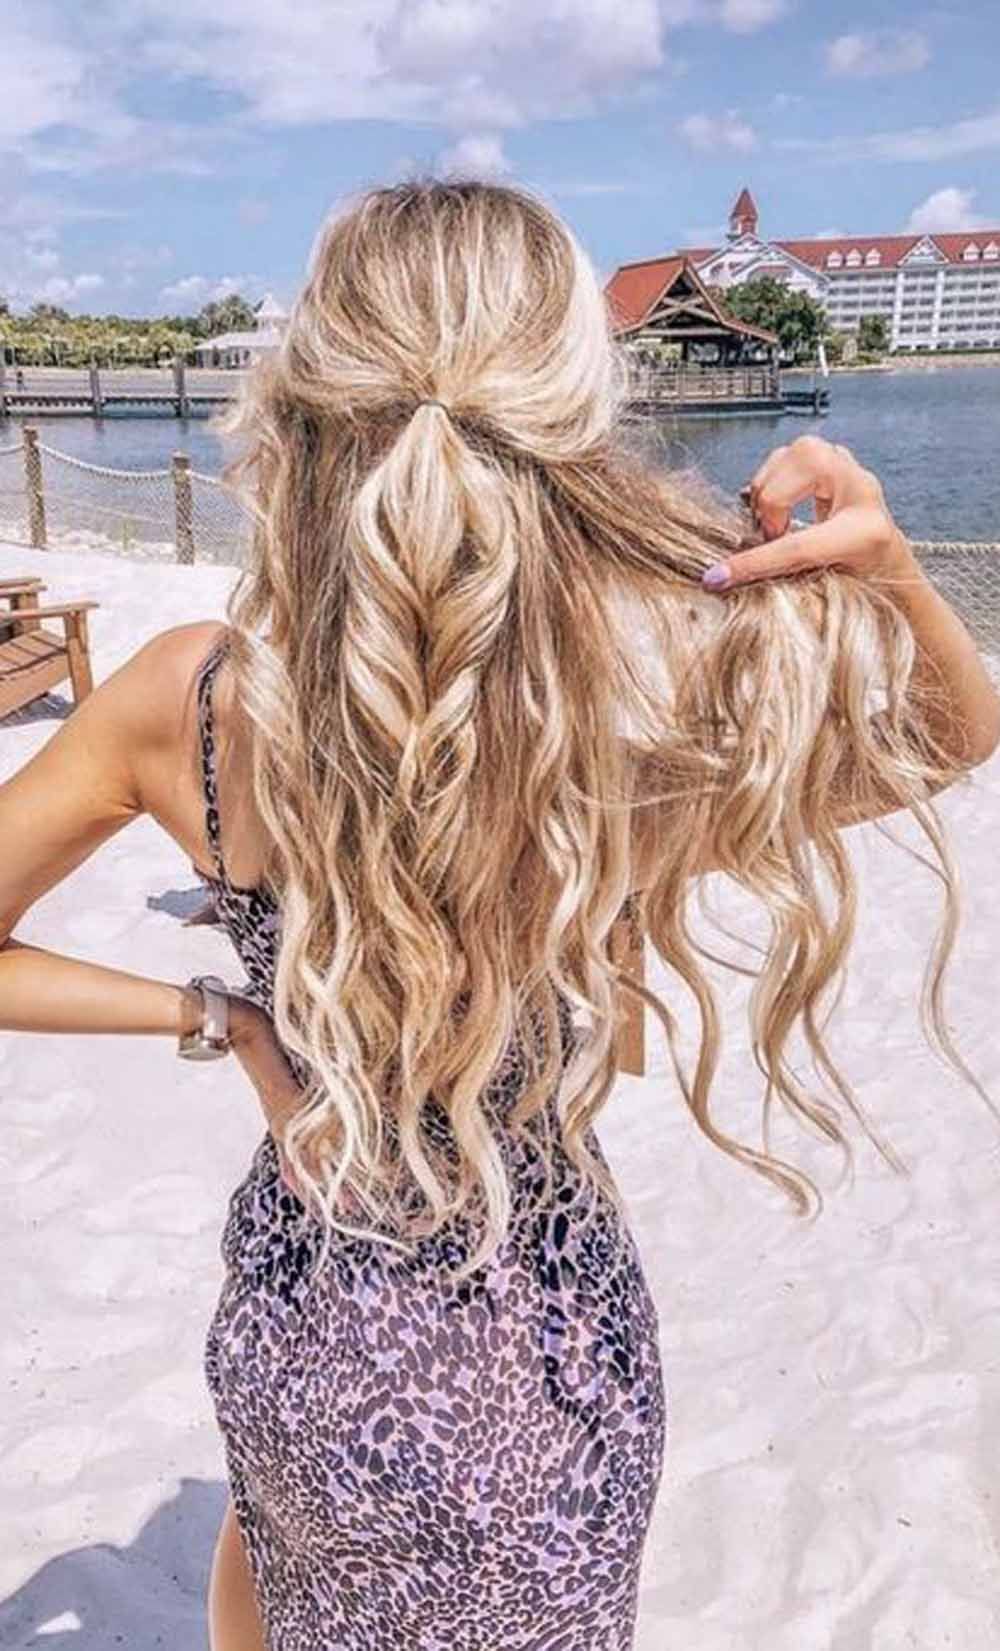 7 Copybook Prom Hairstyles For Your Longer Hair: View Them All -   11 summer hairstyles Braided ideas